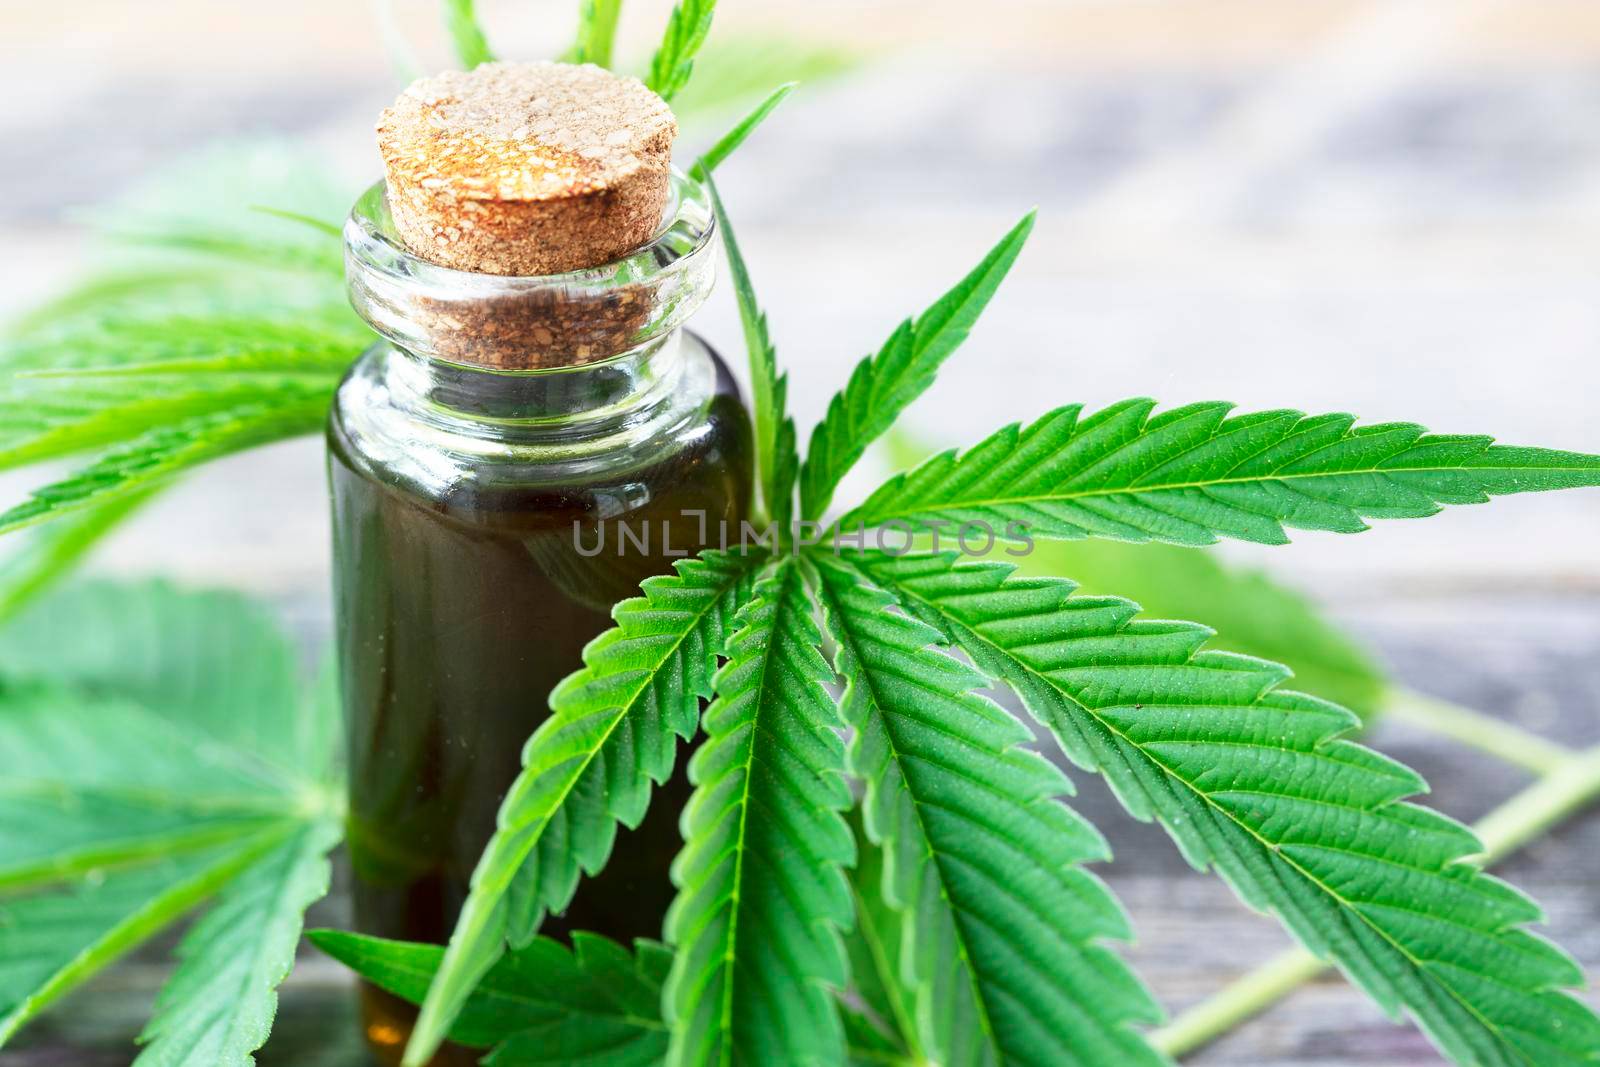 Cannabis oil surrounded by cannabis leaves.